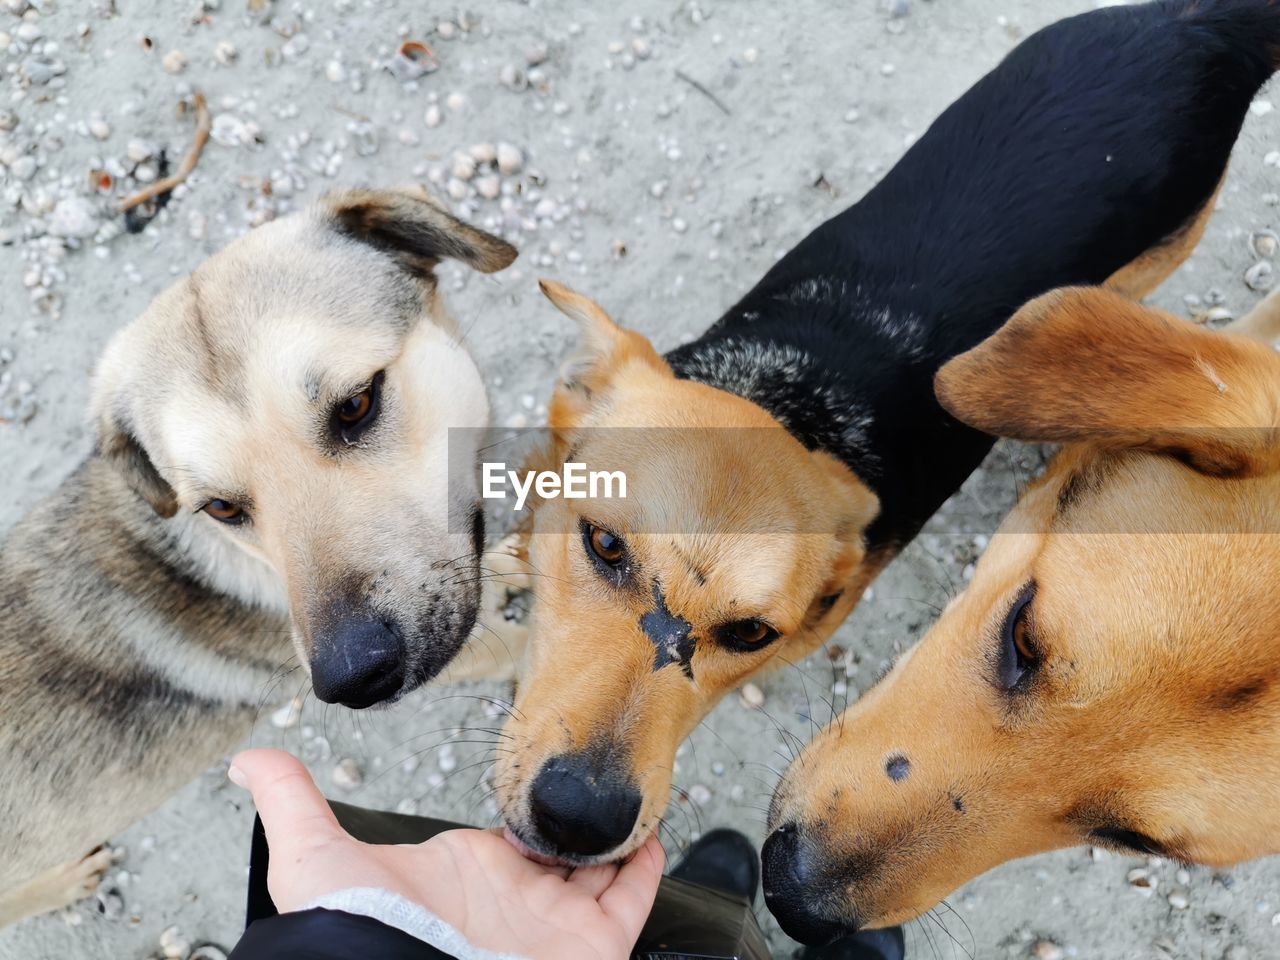 HIGH ANGLE VIEW OF DOG WITH HAND ON DOGS